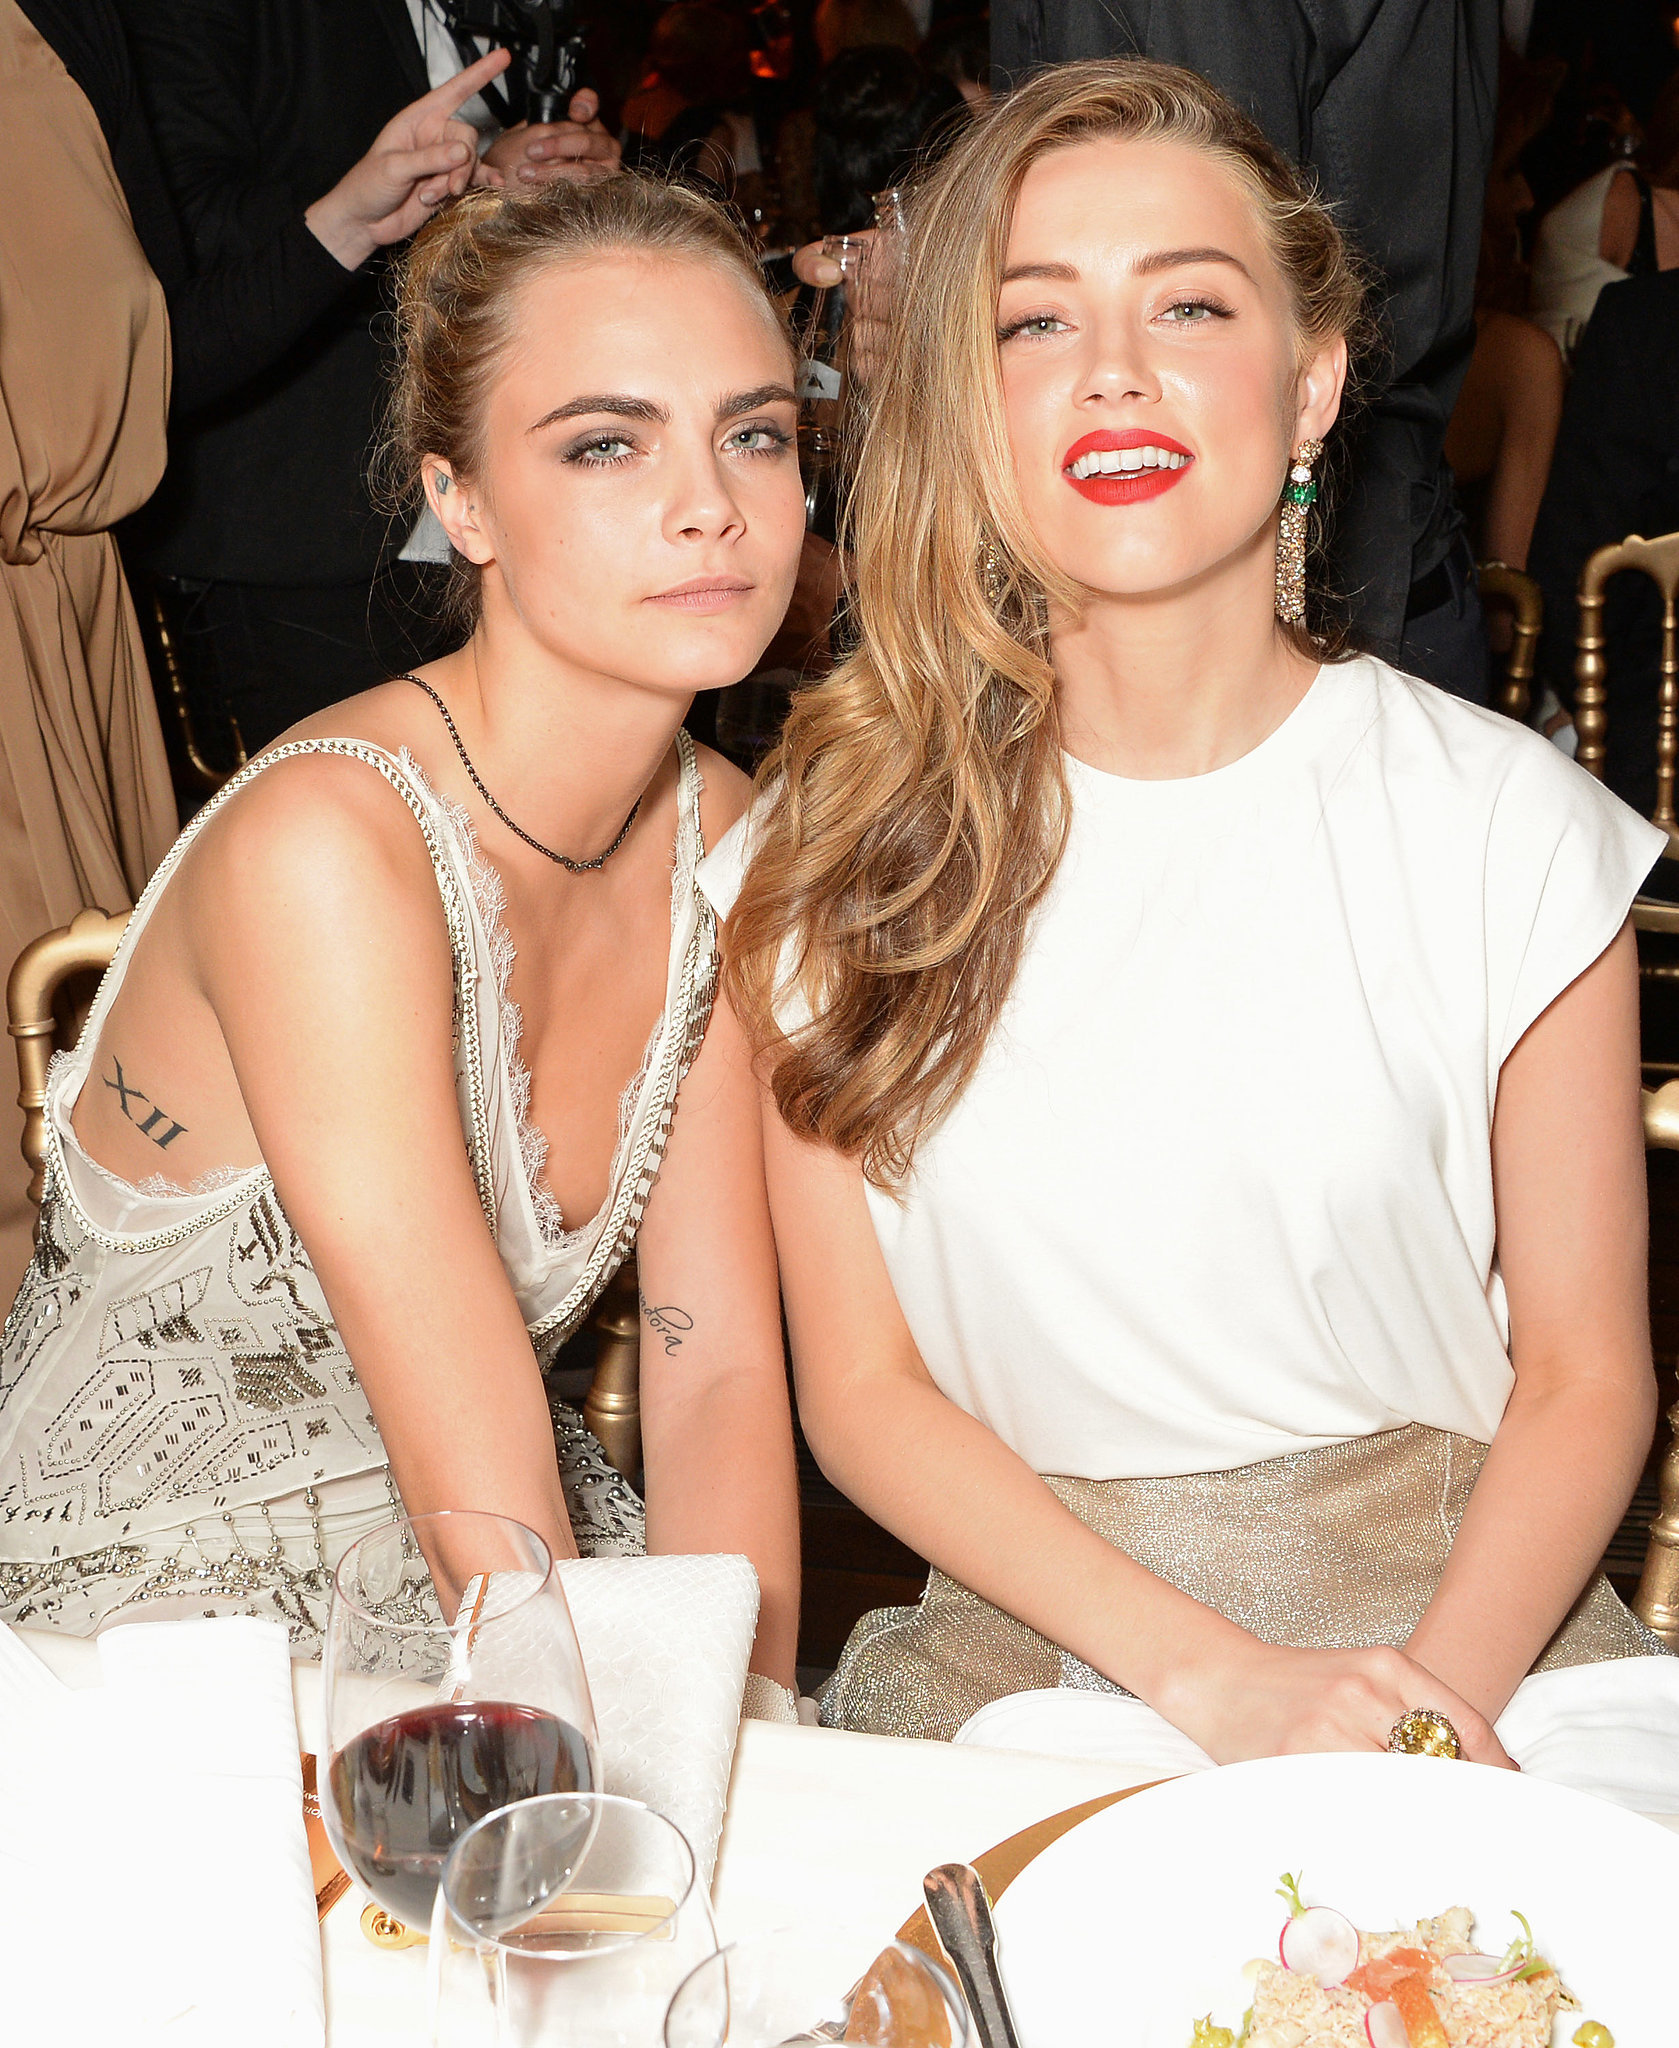 Cara Delevingne and Amber Heard were a standout duo at the Fatale in ... image image